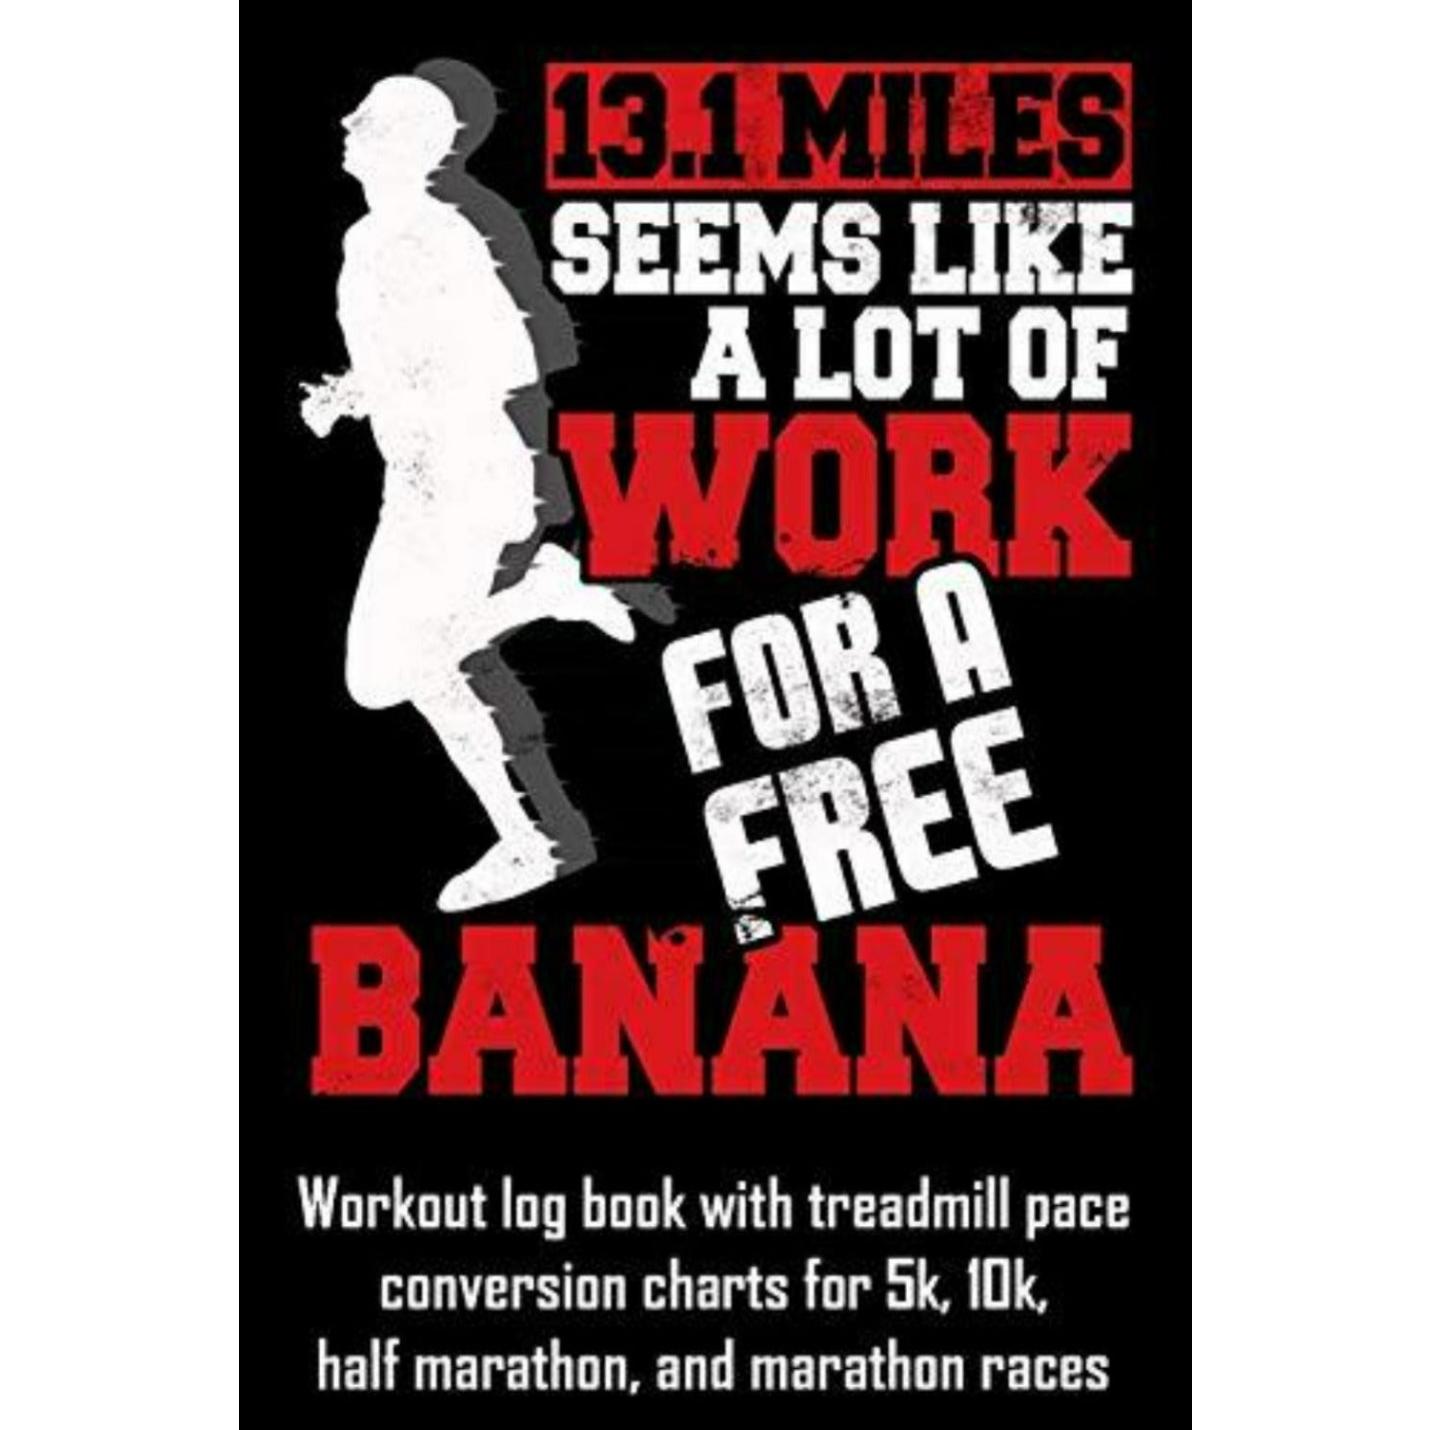 "131 Miles seems like a lot of work for a free banana" workout log book with treadmill pace conversion charts - front cover image